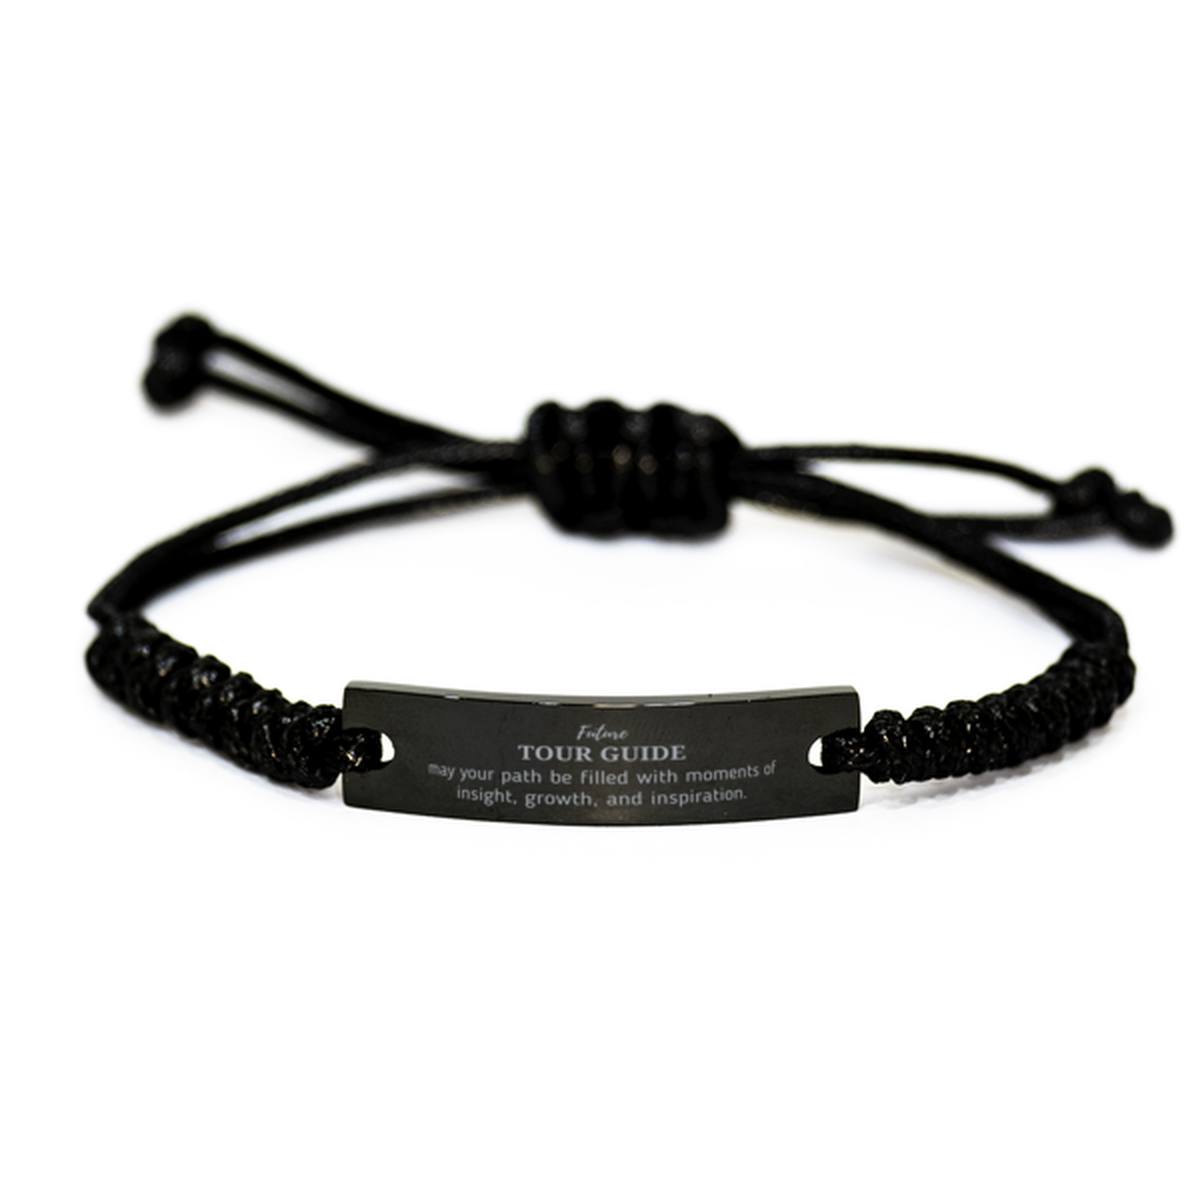 Future Tour Guide Gifts, May your path be filled with moments of insight, Graduation Gifts for New Tour Guide, Christmas Unique Black Rope Bracelet For Men, Women, Friends